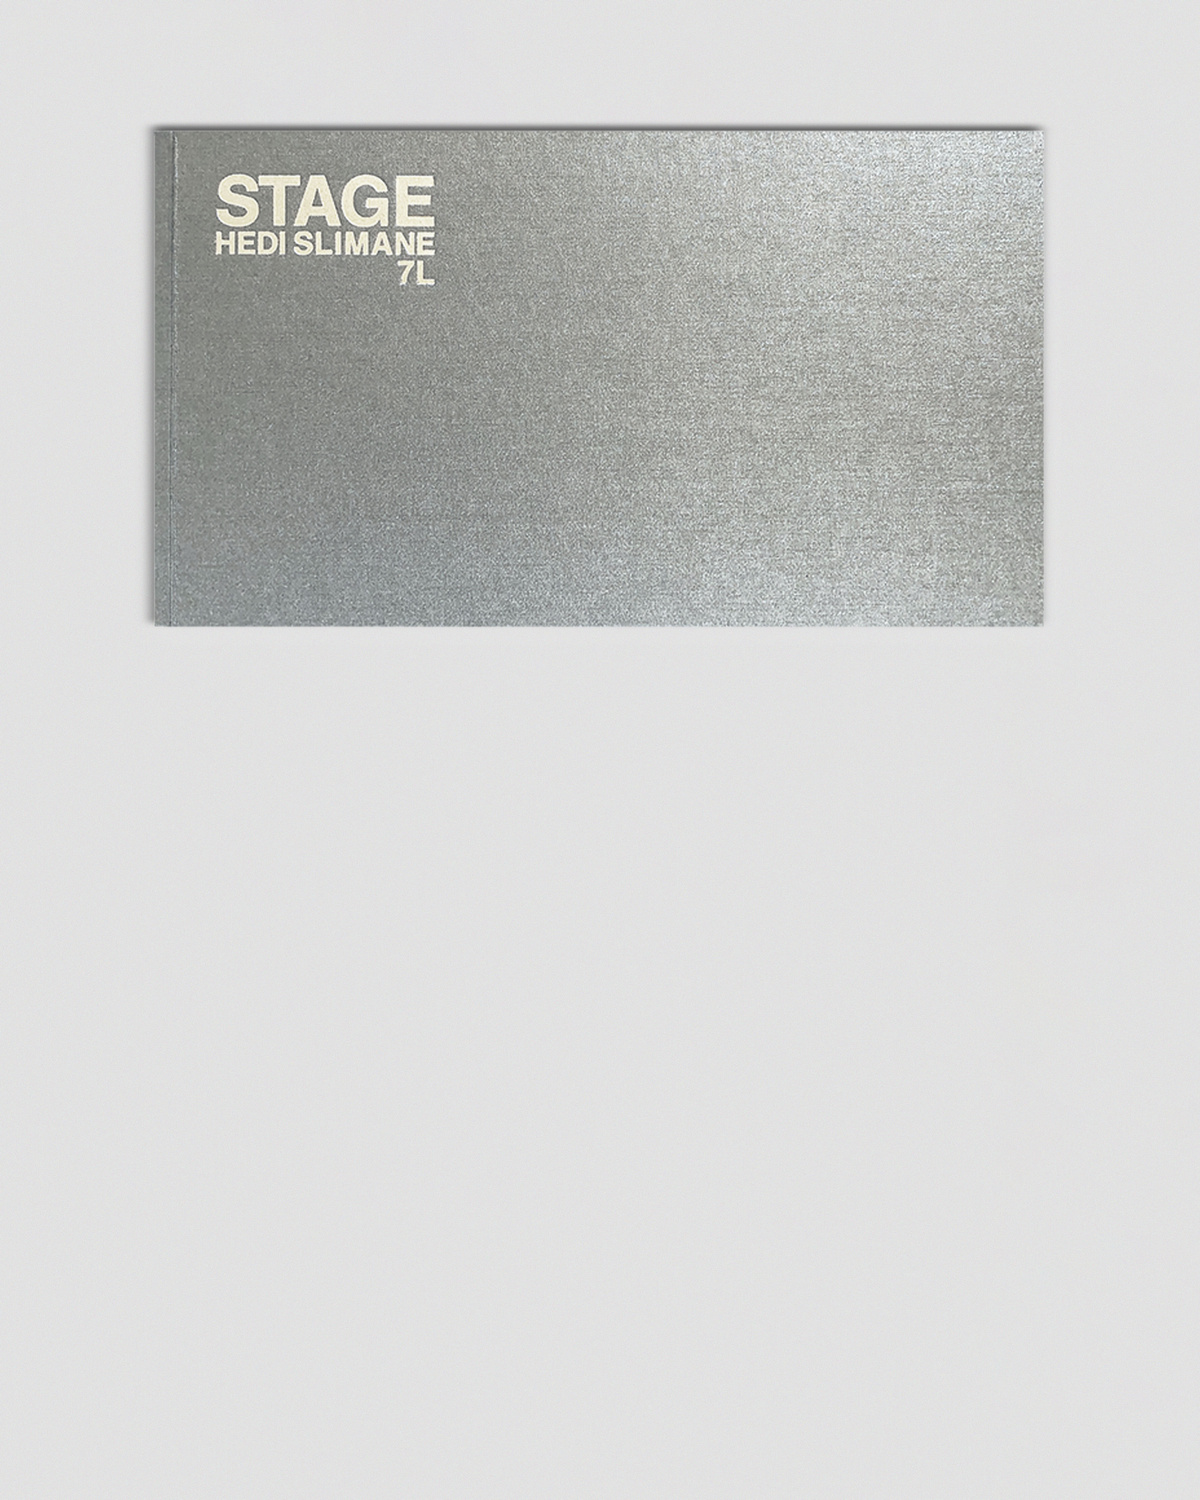 Stage - Hedi Slimane ($240) - In Form Library